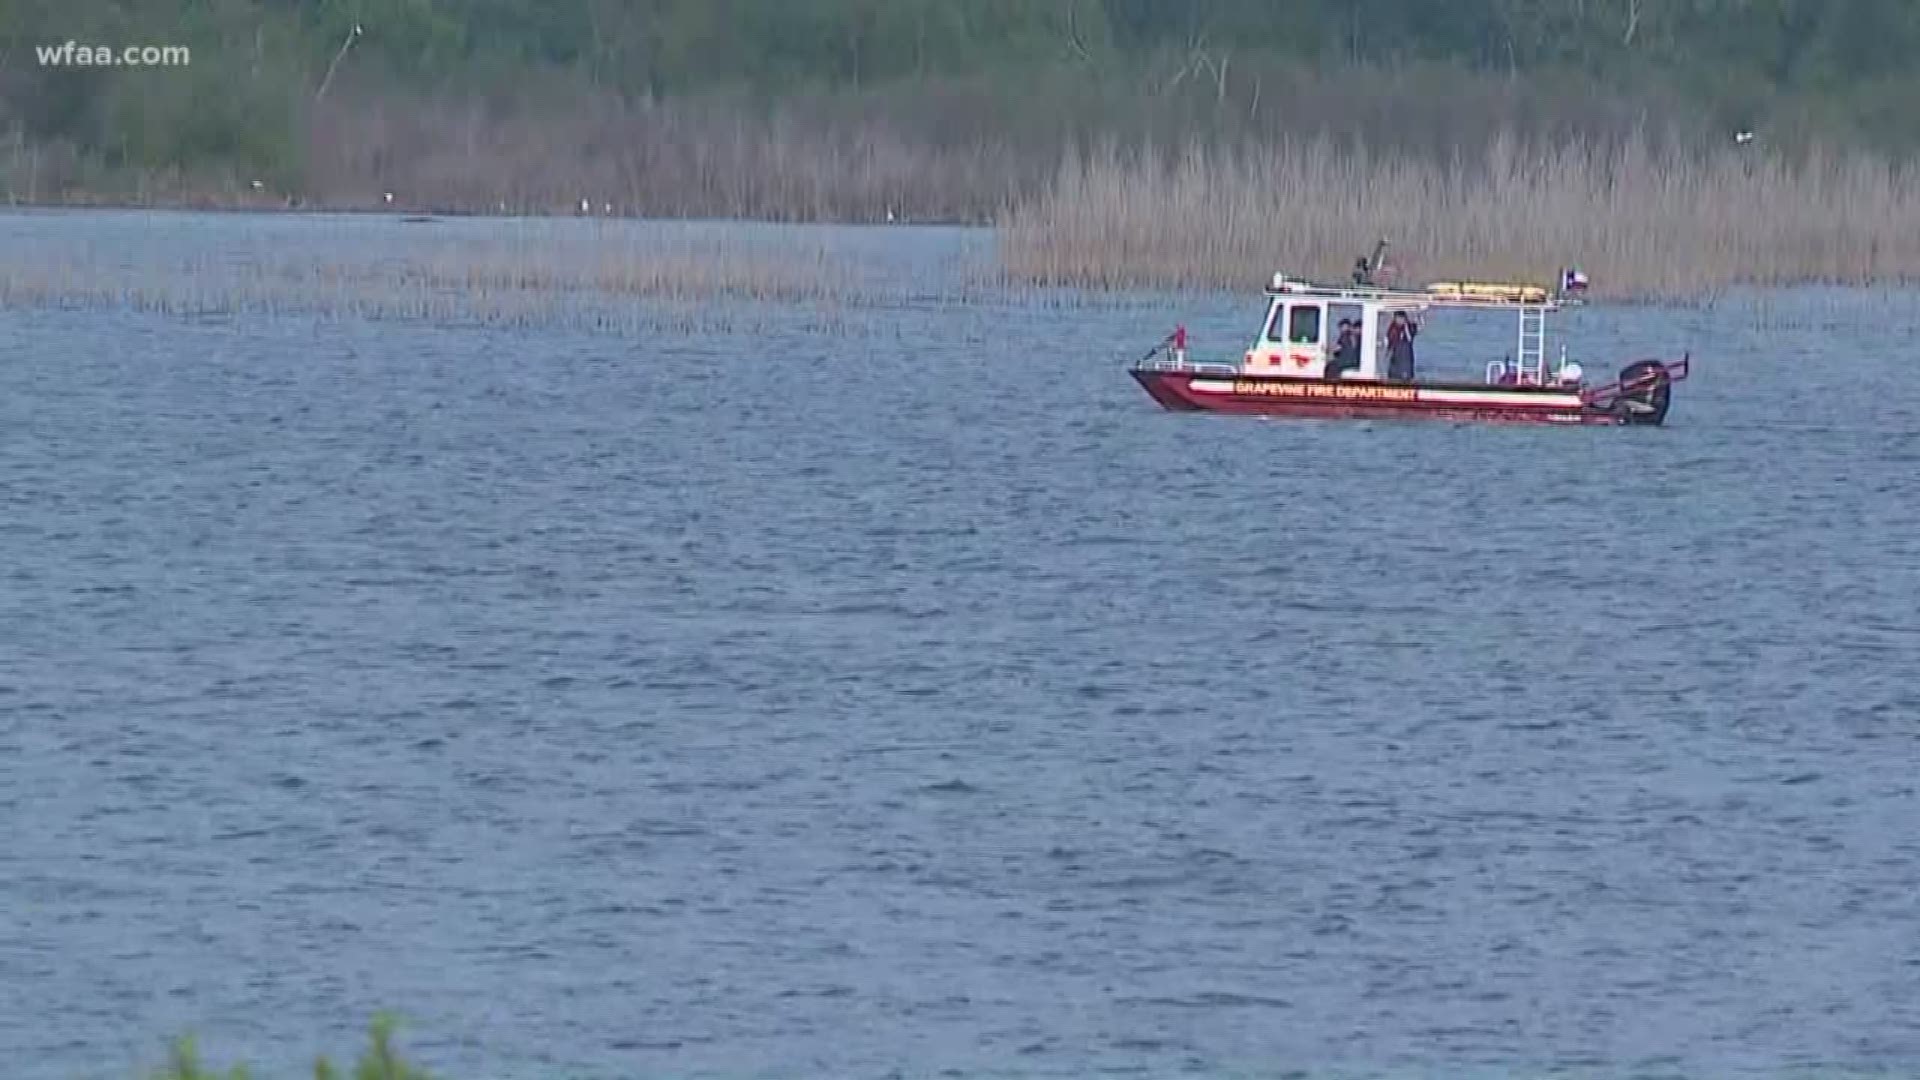 Crews had been searching for a man who fell off a pontoon boat Saturday afternoon.